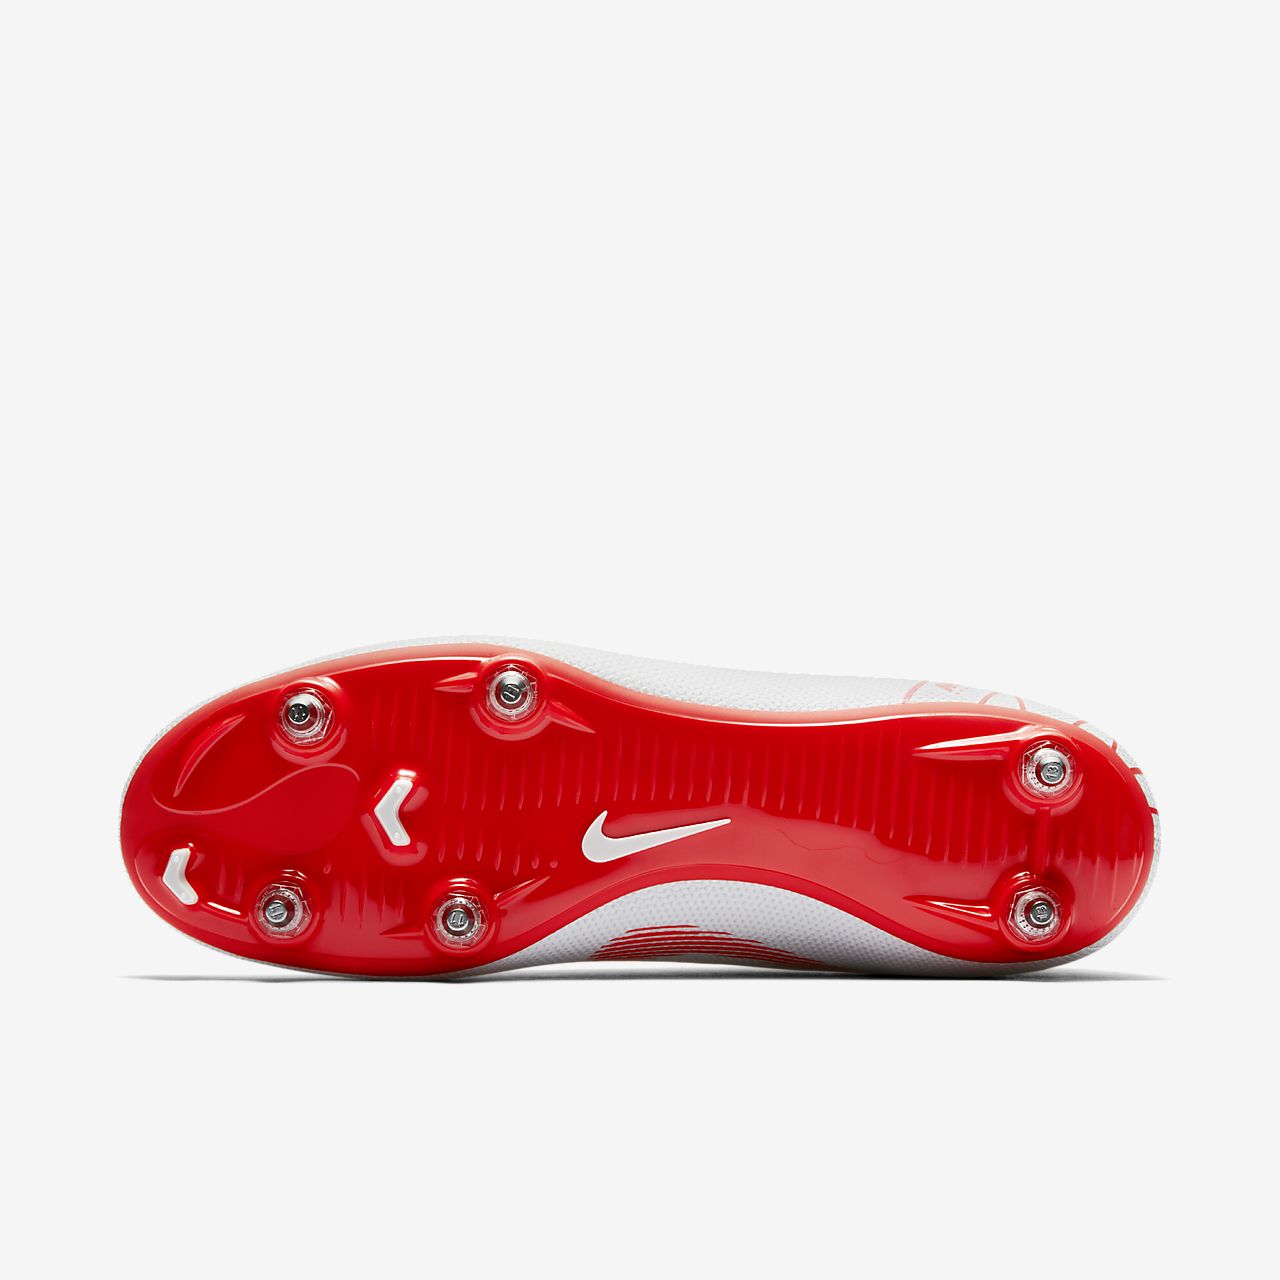 Nike Mercurial Superfly 6 Academy TF Turf shoes Shoes.